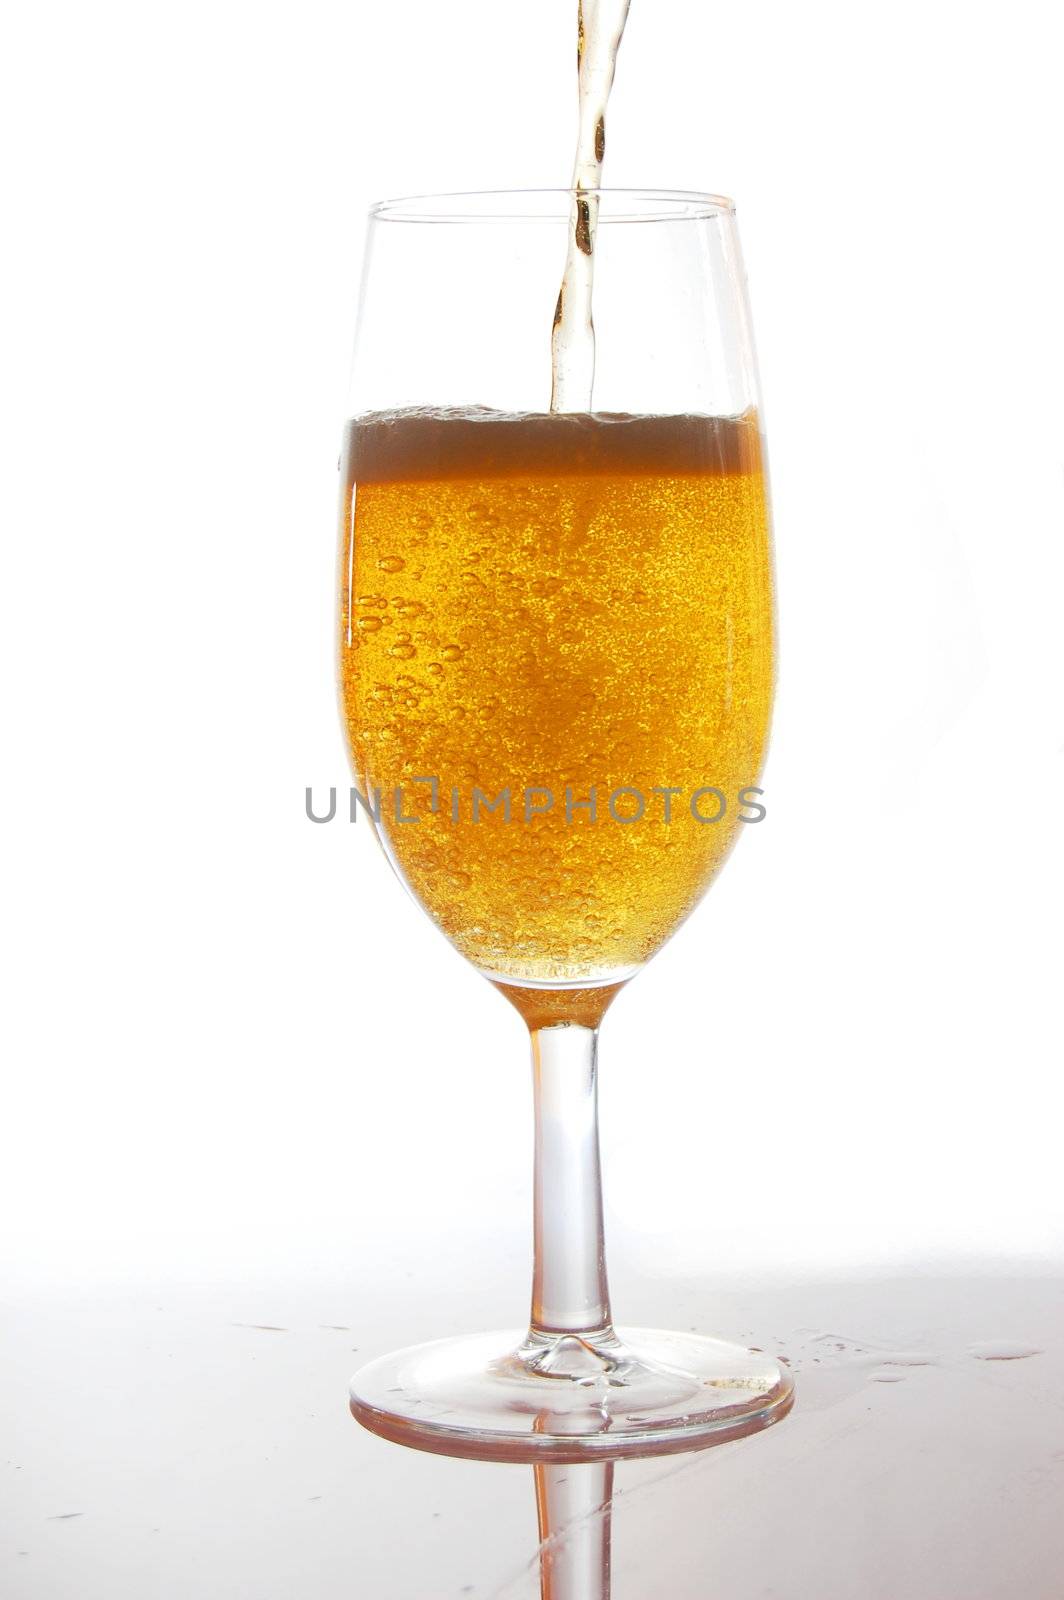 fresh and cold beer on white background